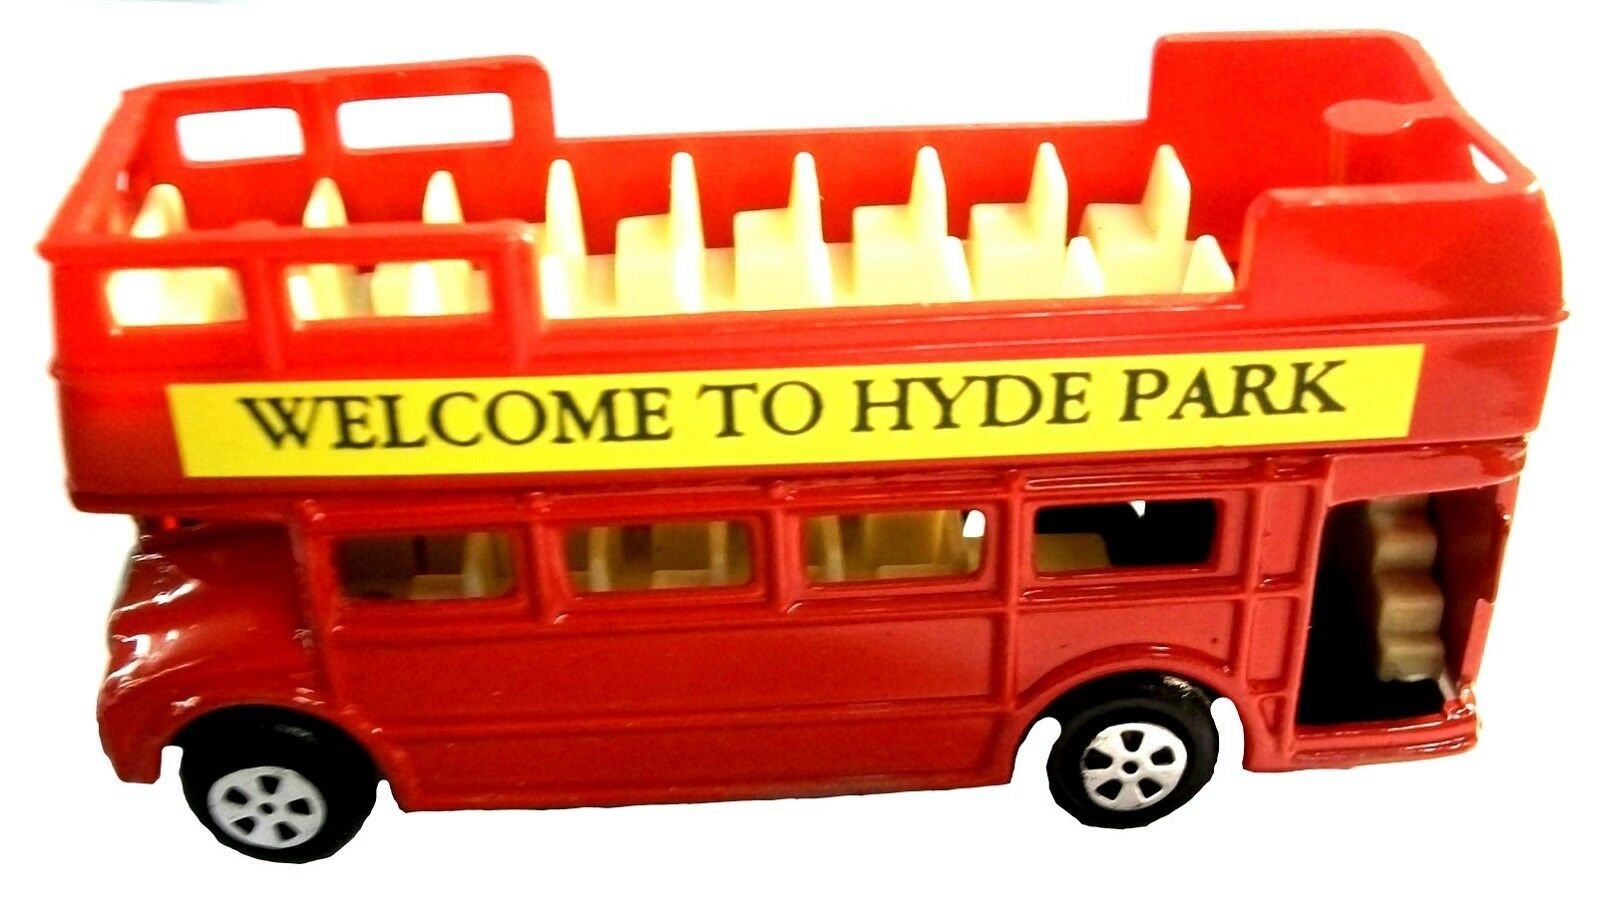 Saddle Mountain Souvenir Red Double Decker Sight Seeing Bus Die Cast Metal Collectible Pencil Sharpener